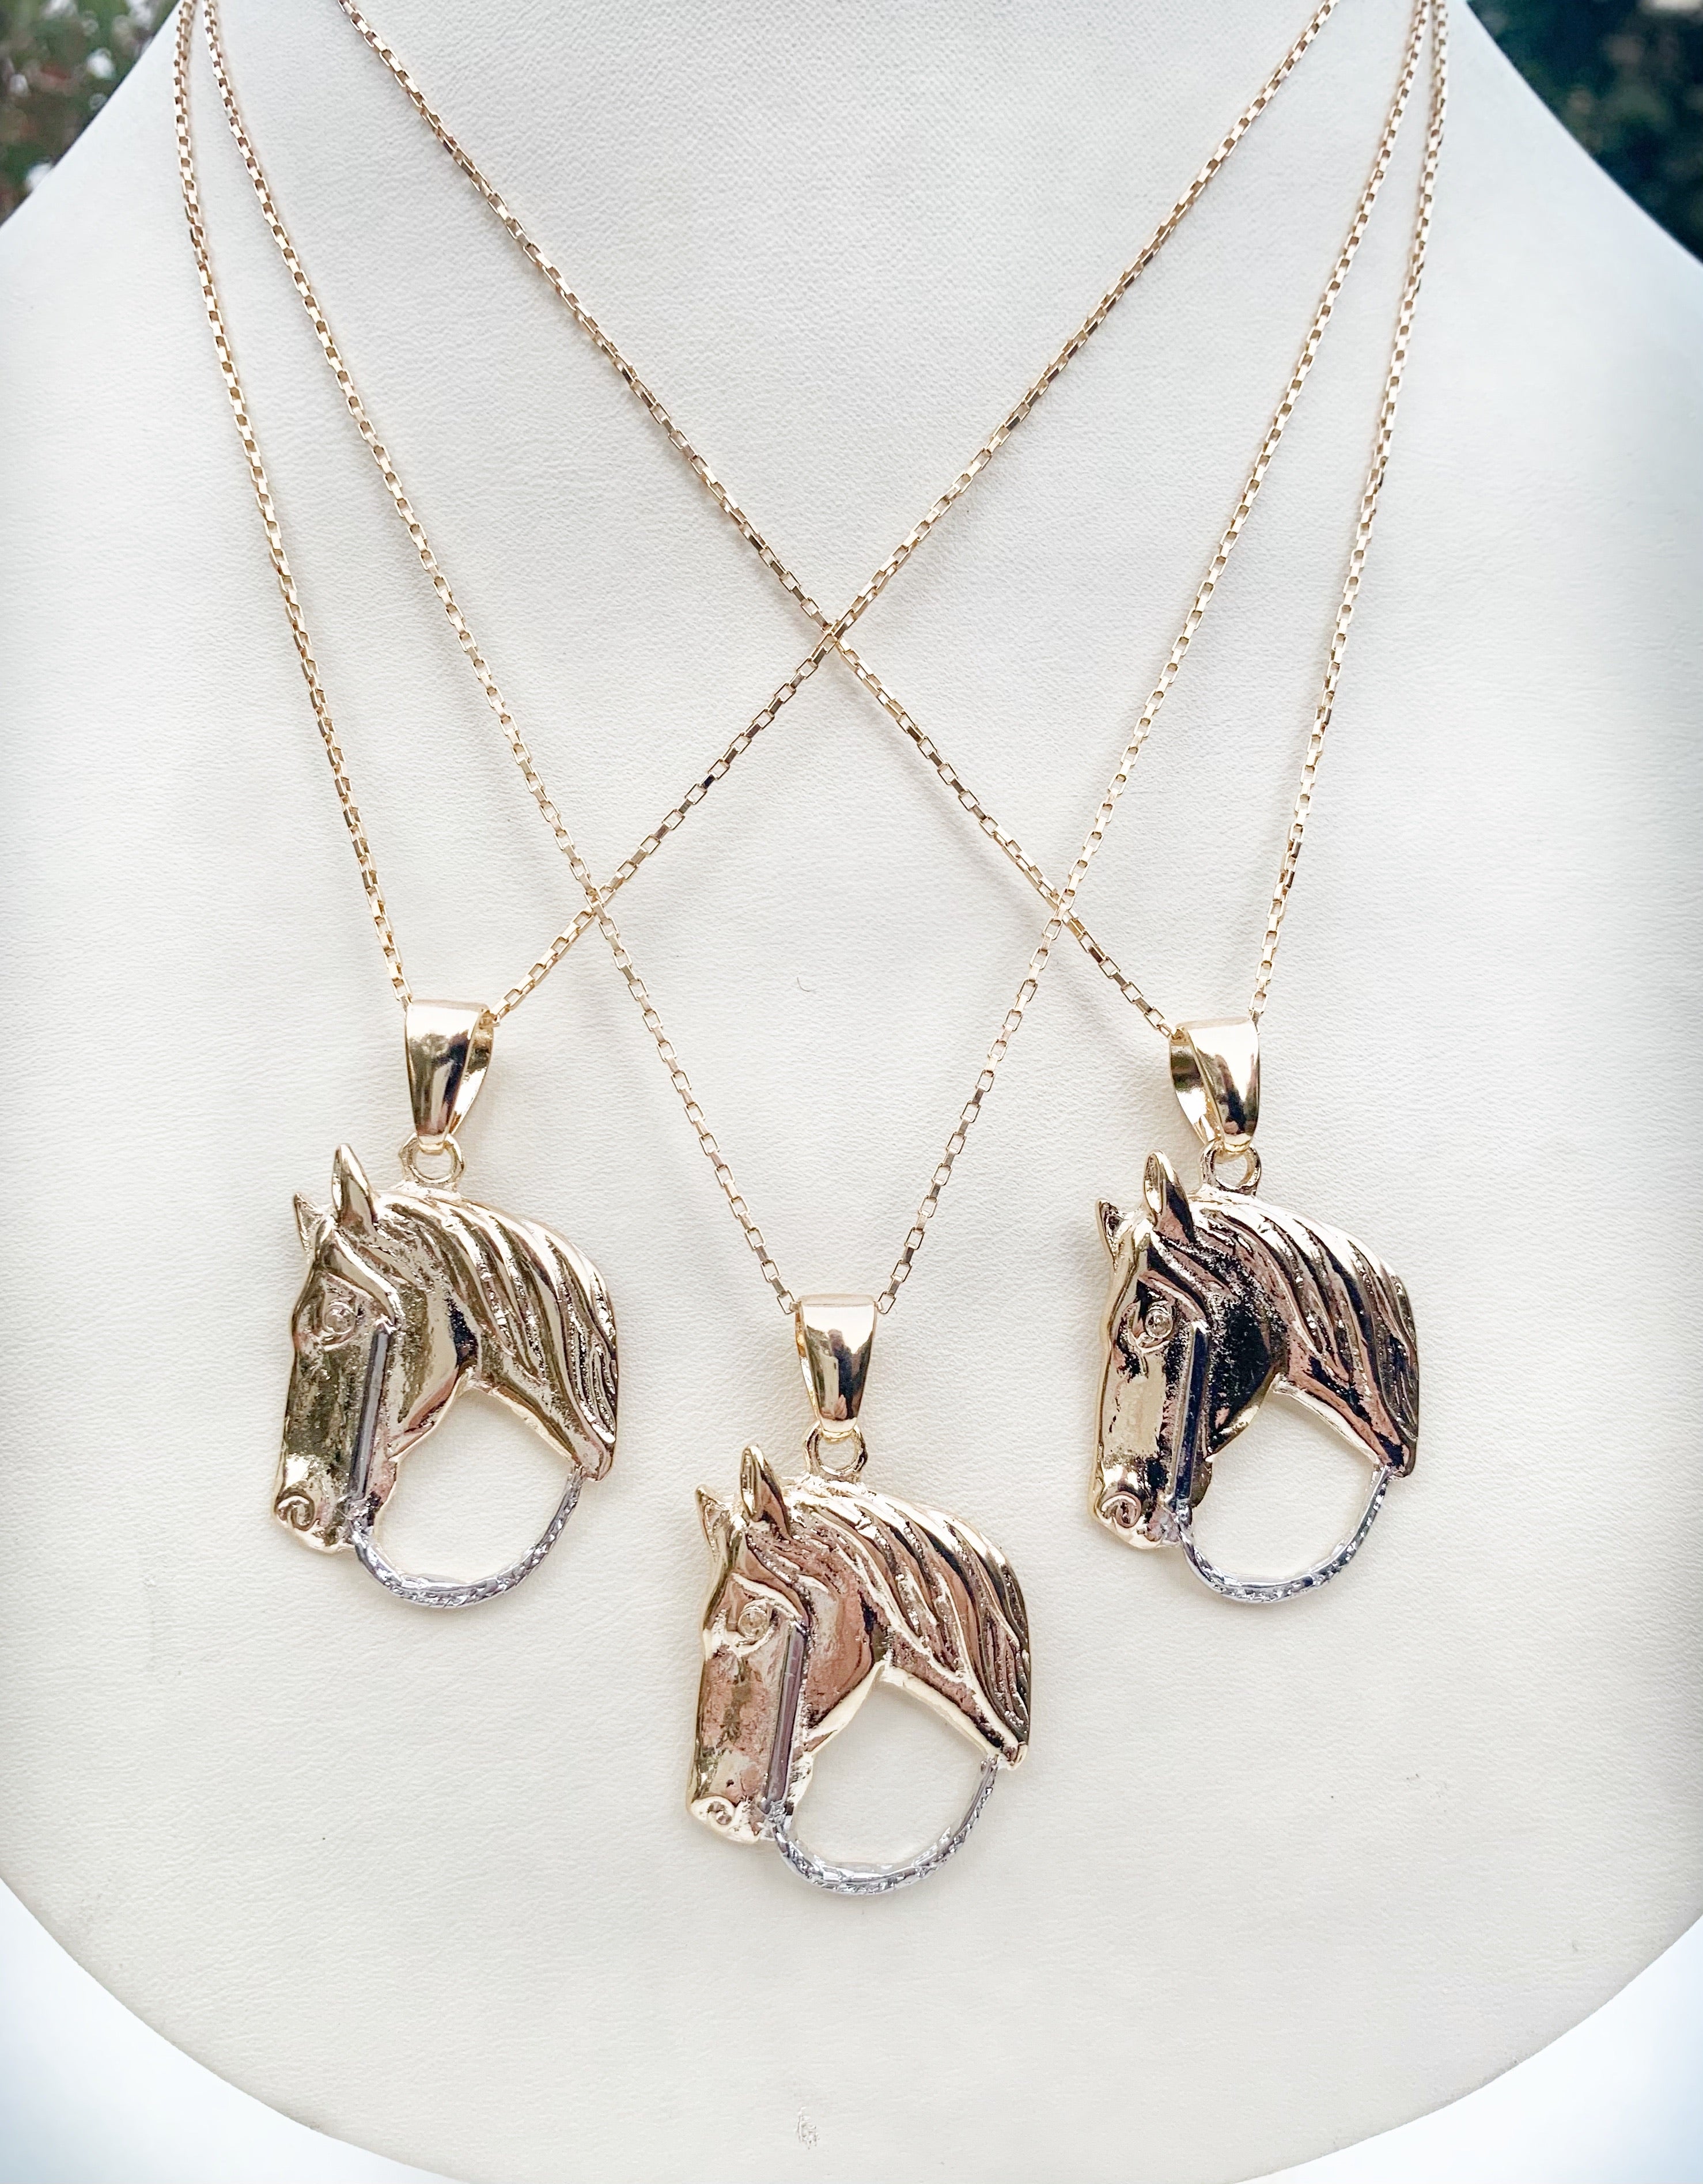 Equestrian two tone horse head necklace